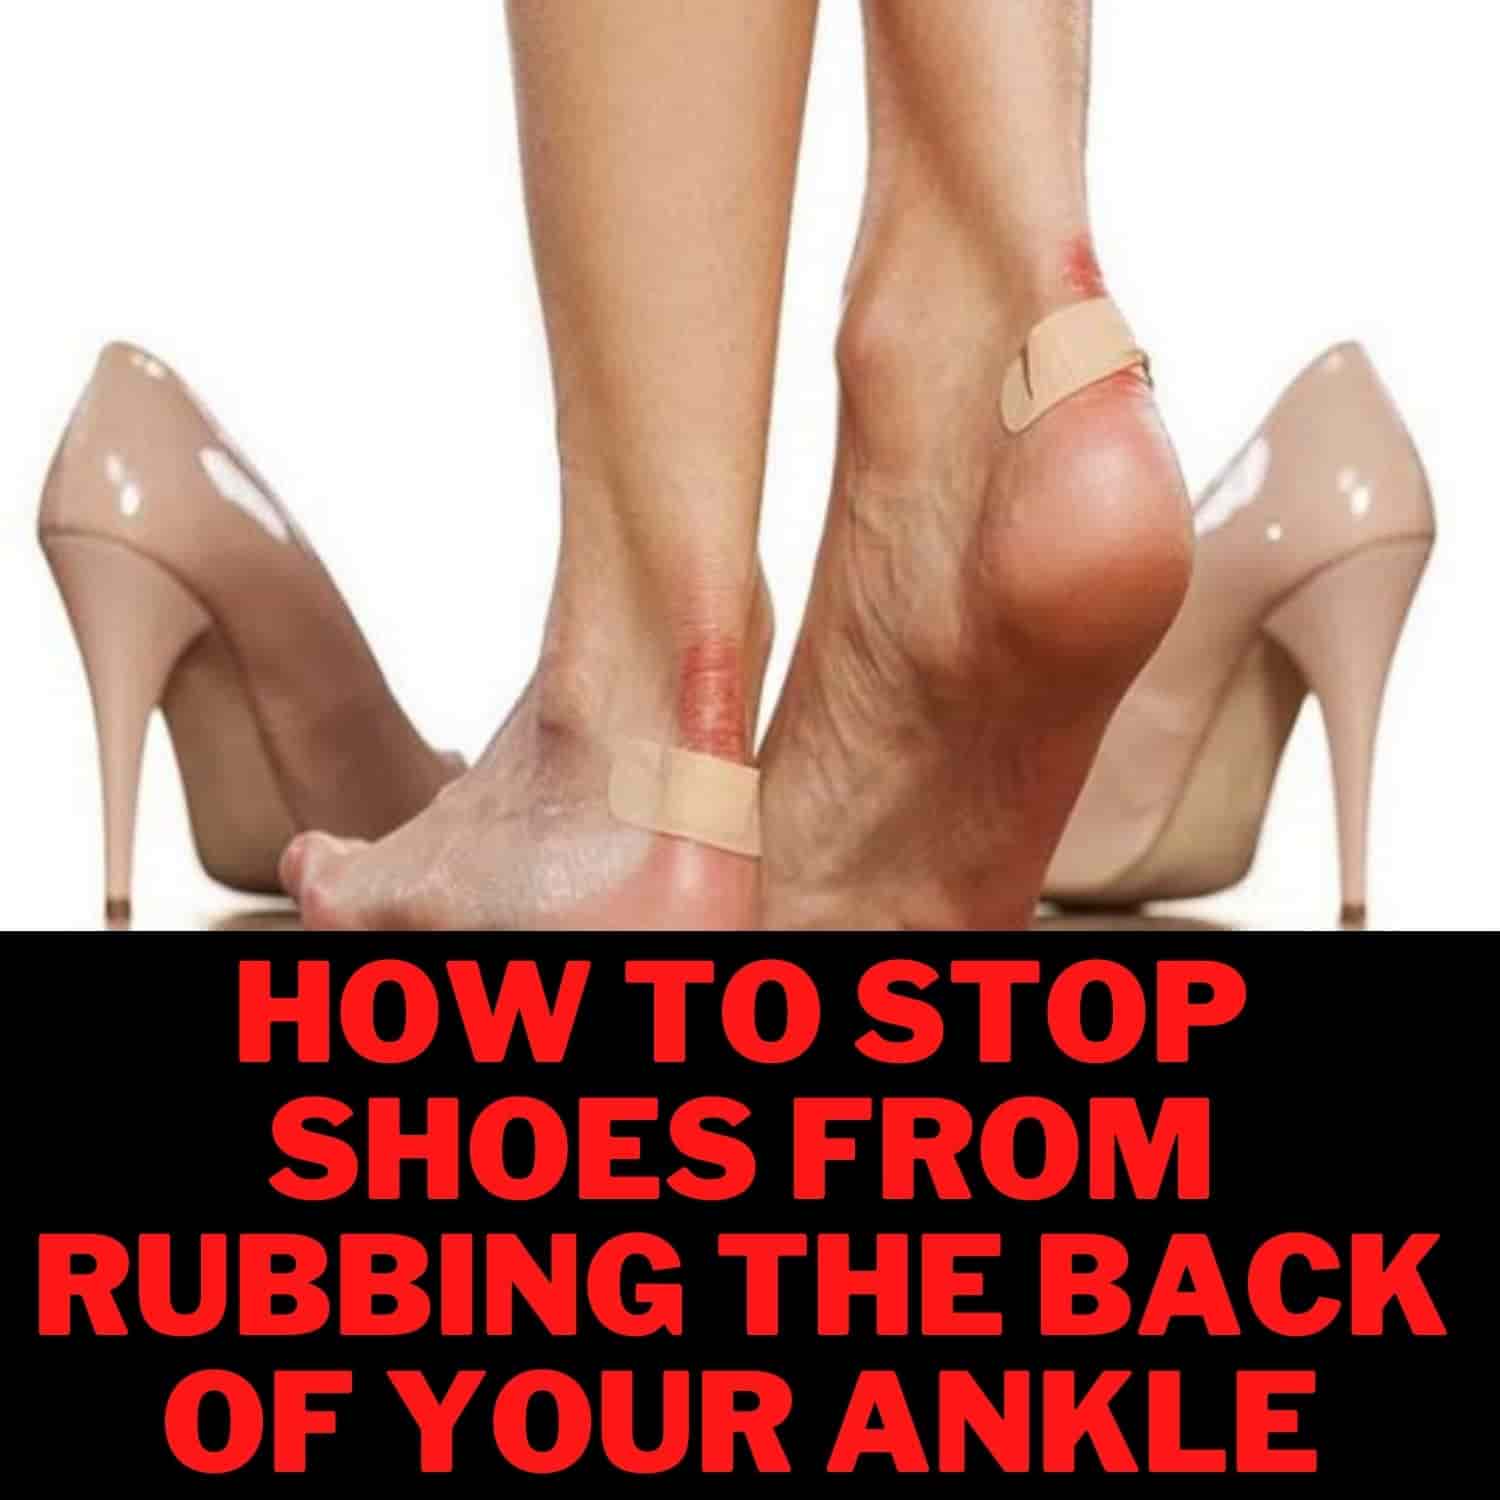 Guide How To Stop Shoes From Rubbing The Back of Your Ankle